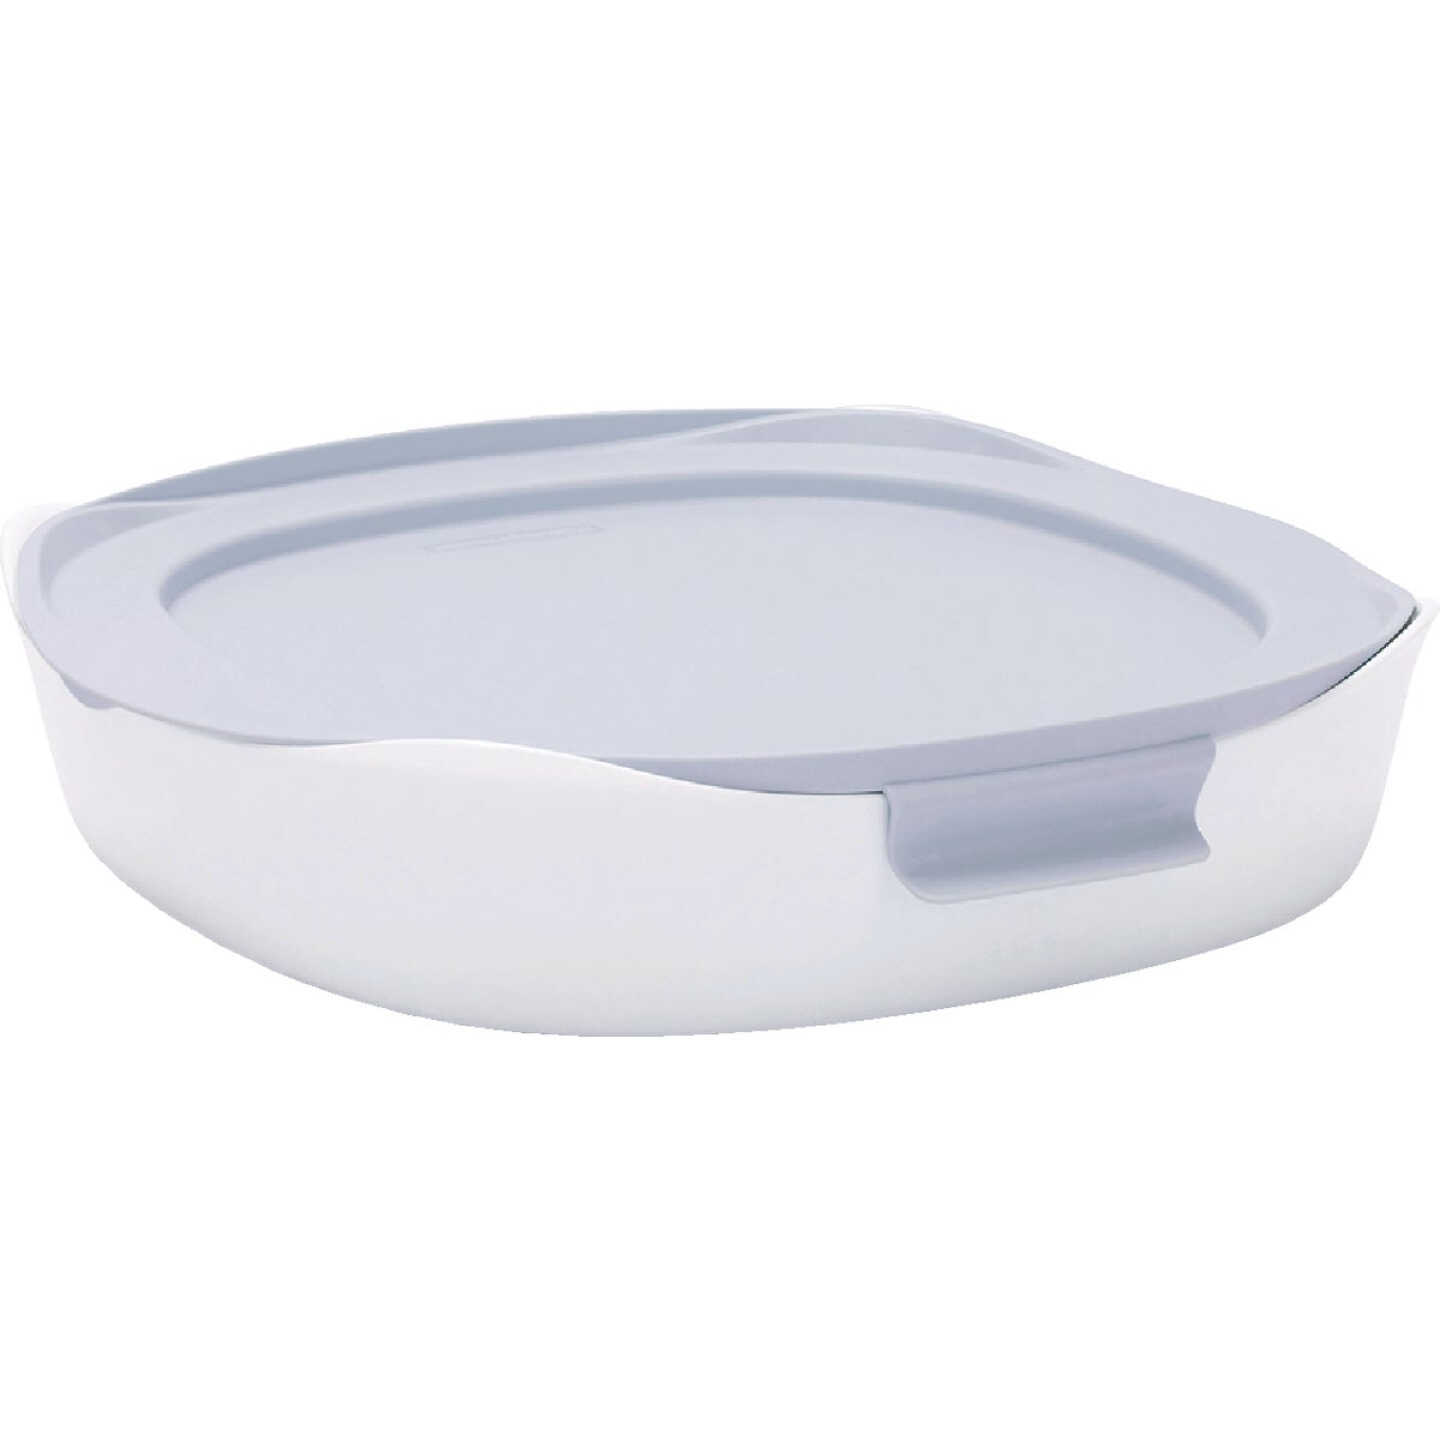 Rubbermaid DuraLite 10 In. Square Glass Baking Dish with Lid - CHC